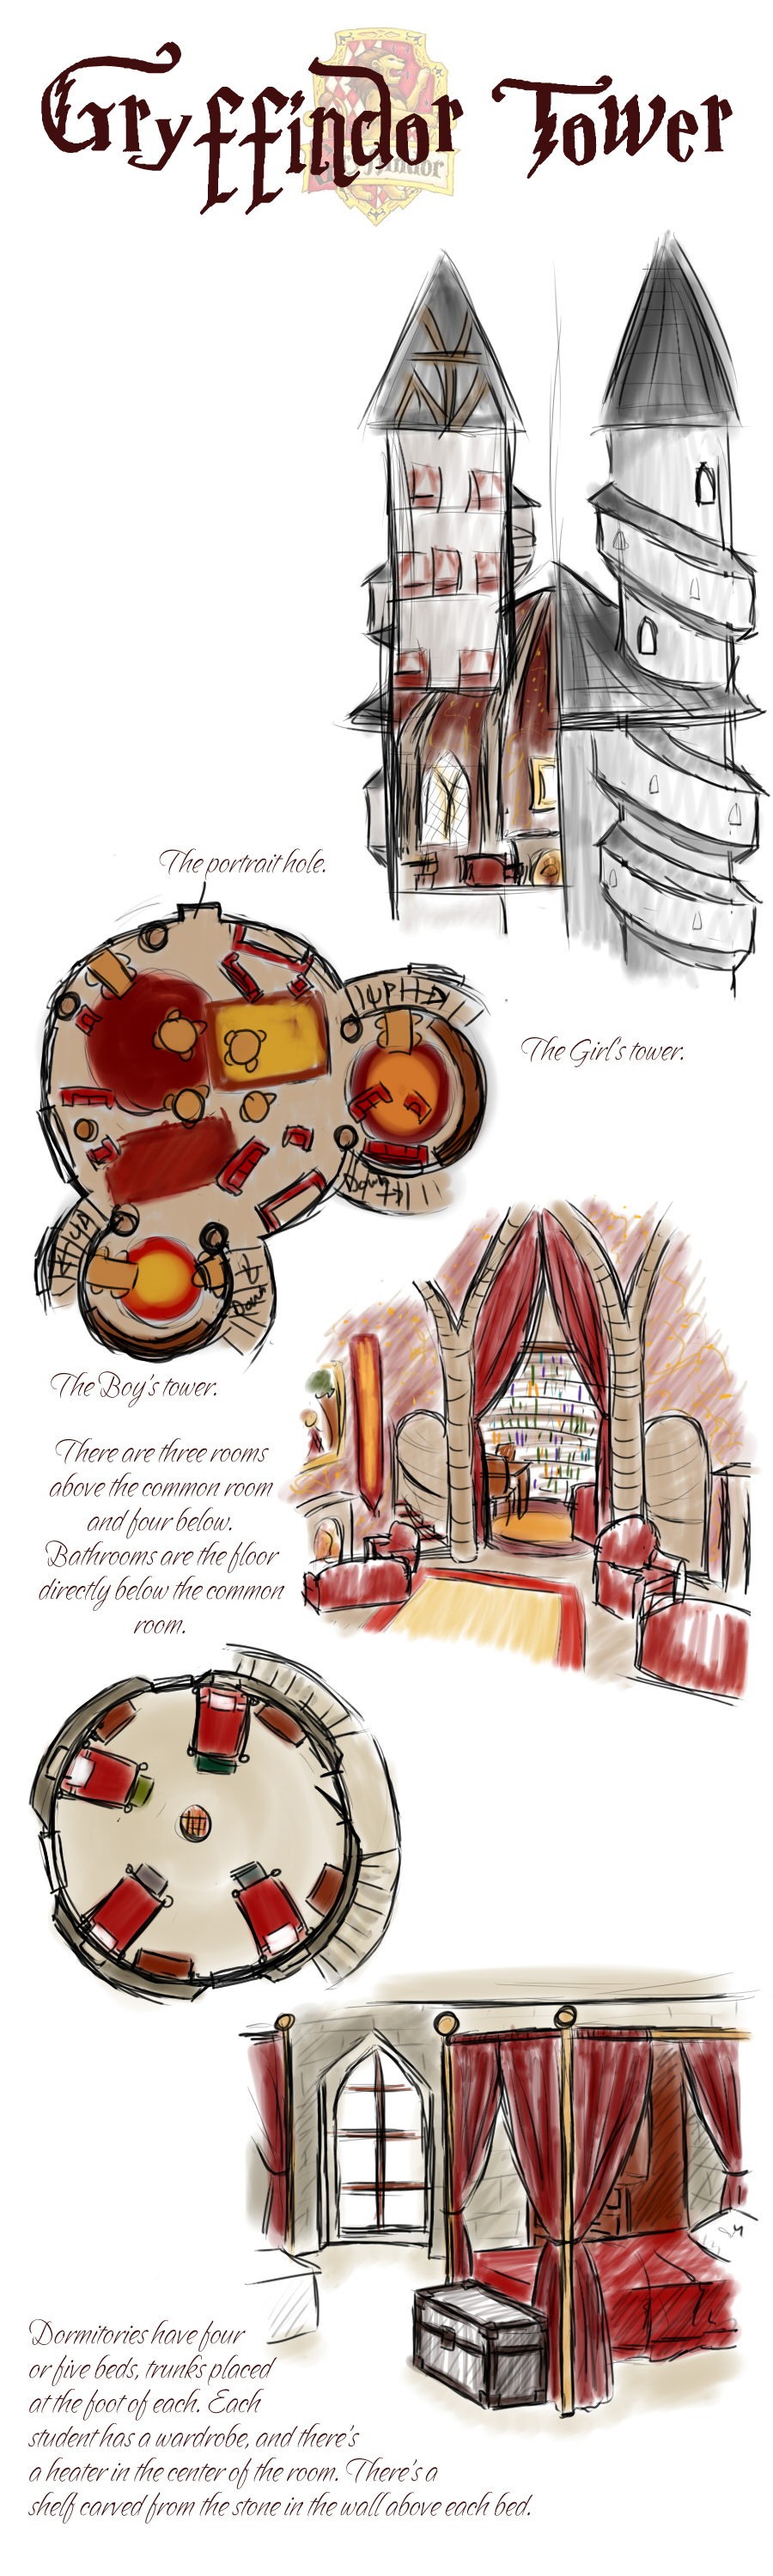 Gryffindor Tower by Whisperwings on DeviantArt